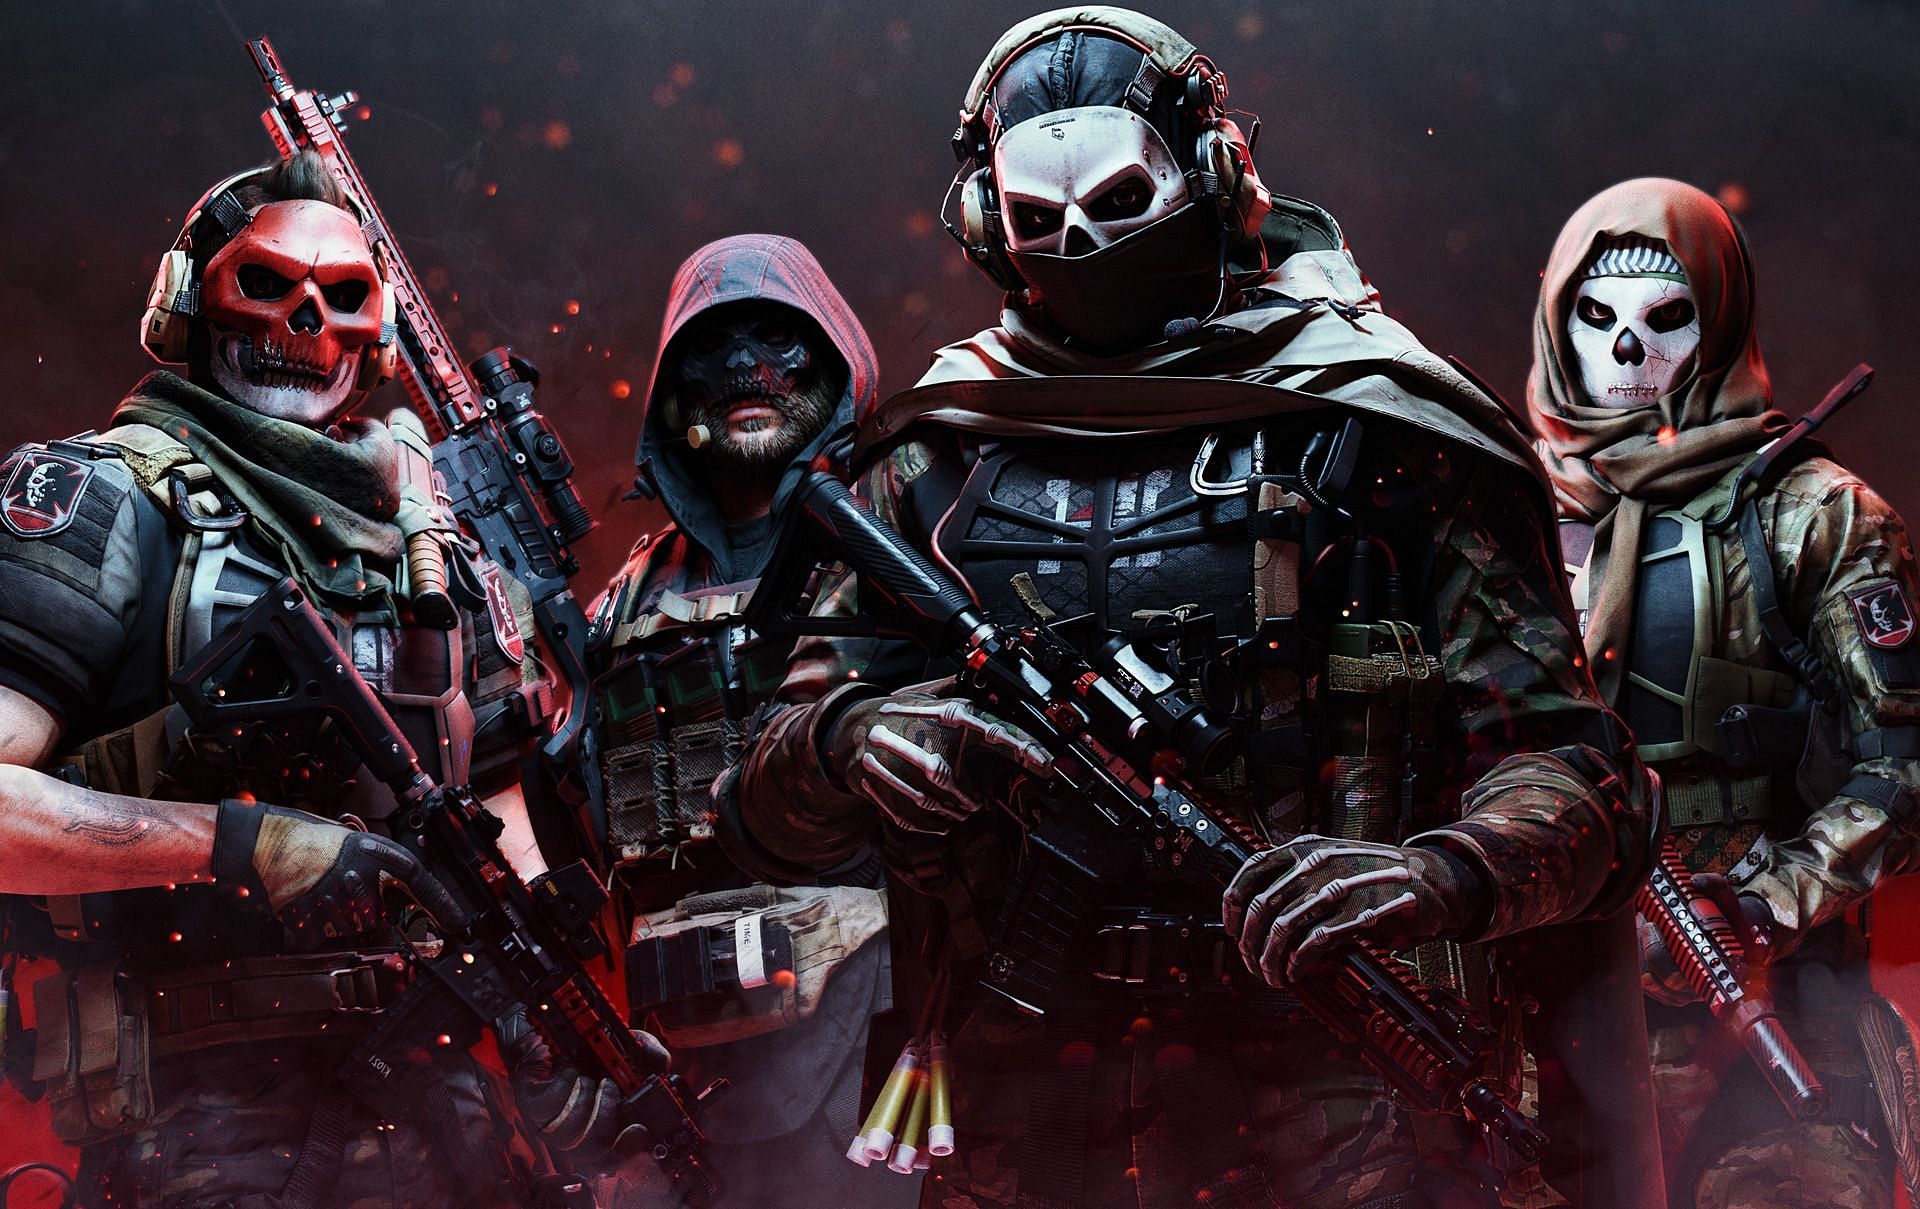 The Red Team 141 Operator Pack (image via Activision)